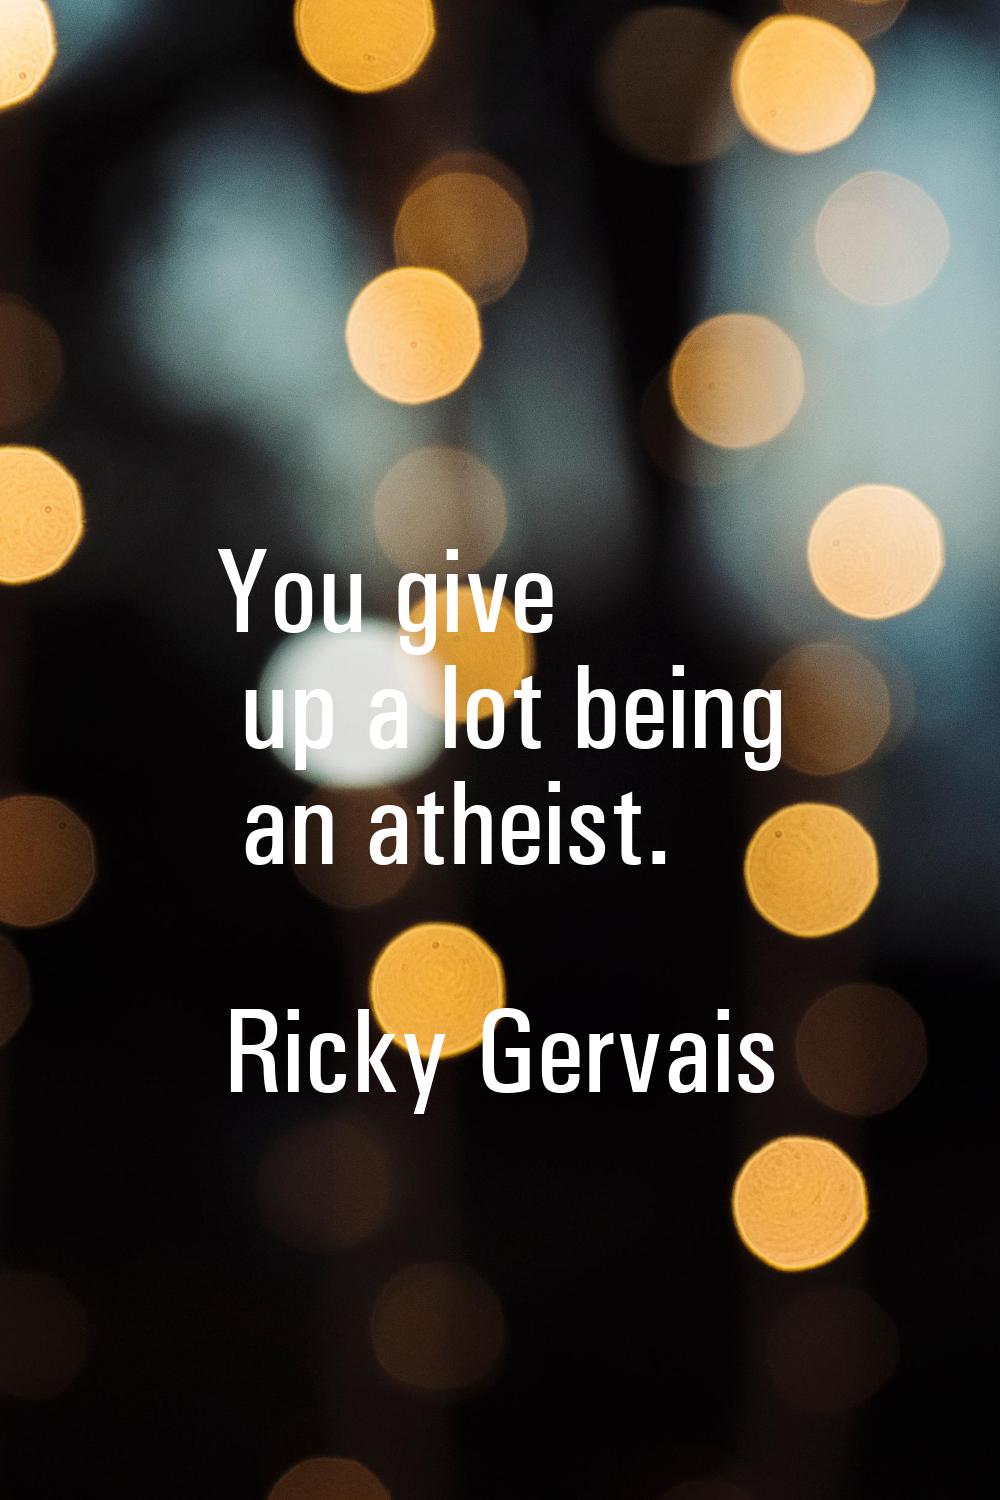 You give up a lot being an atheist.